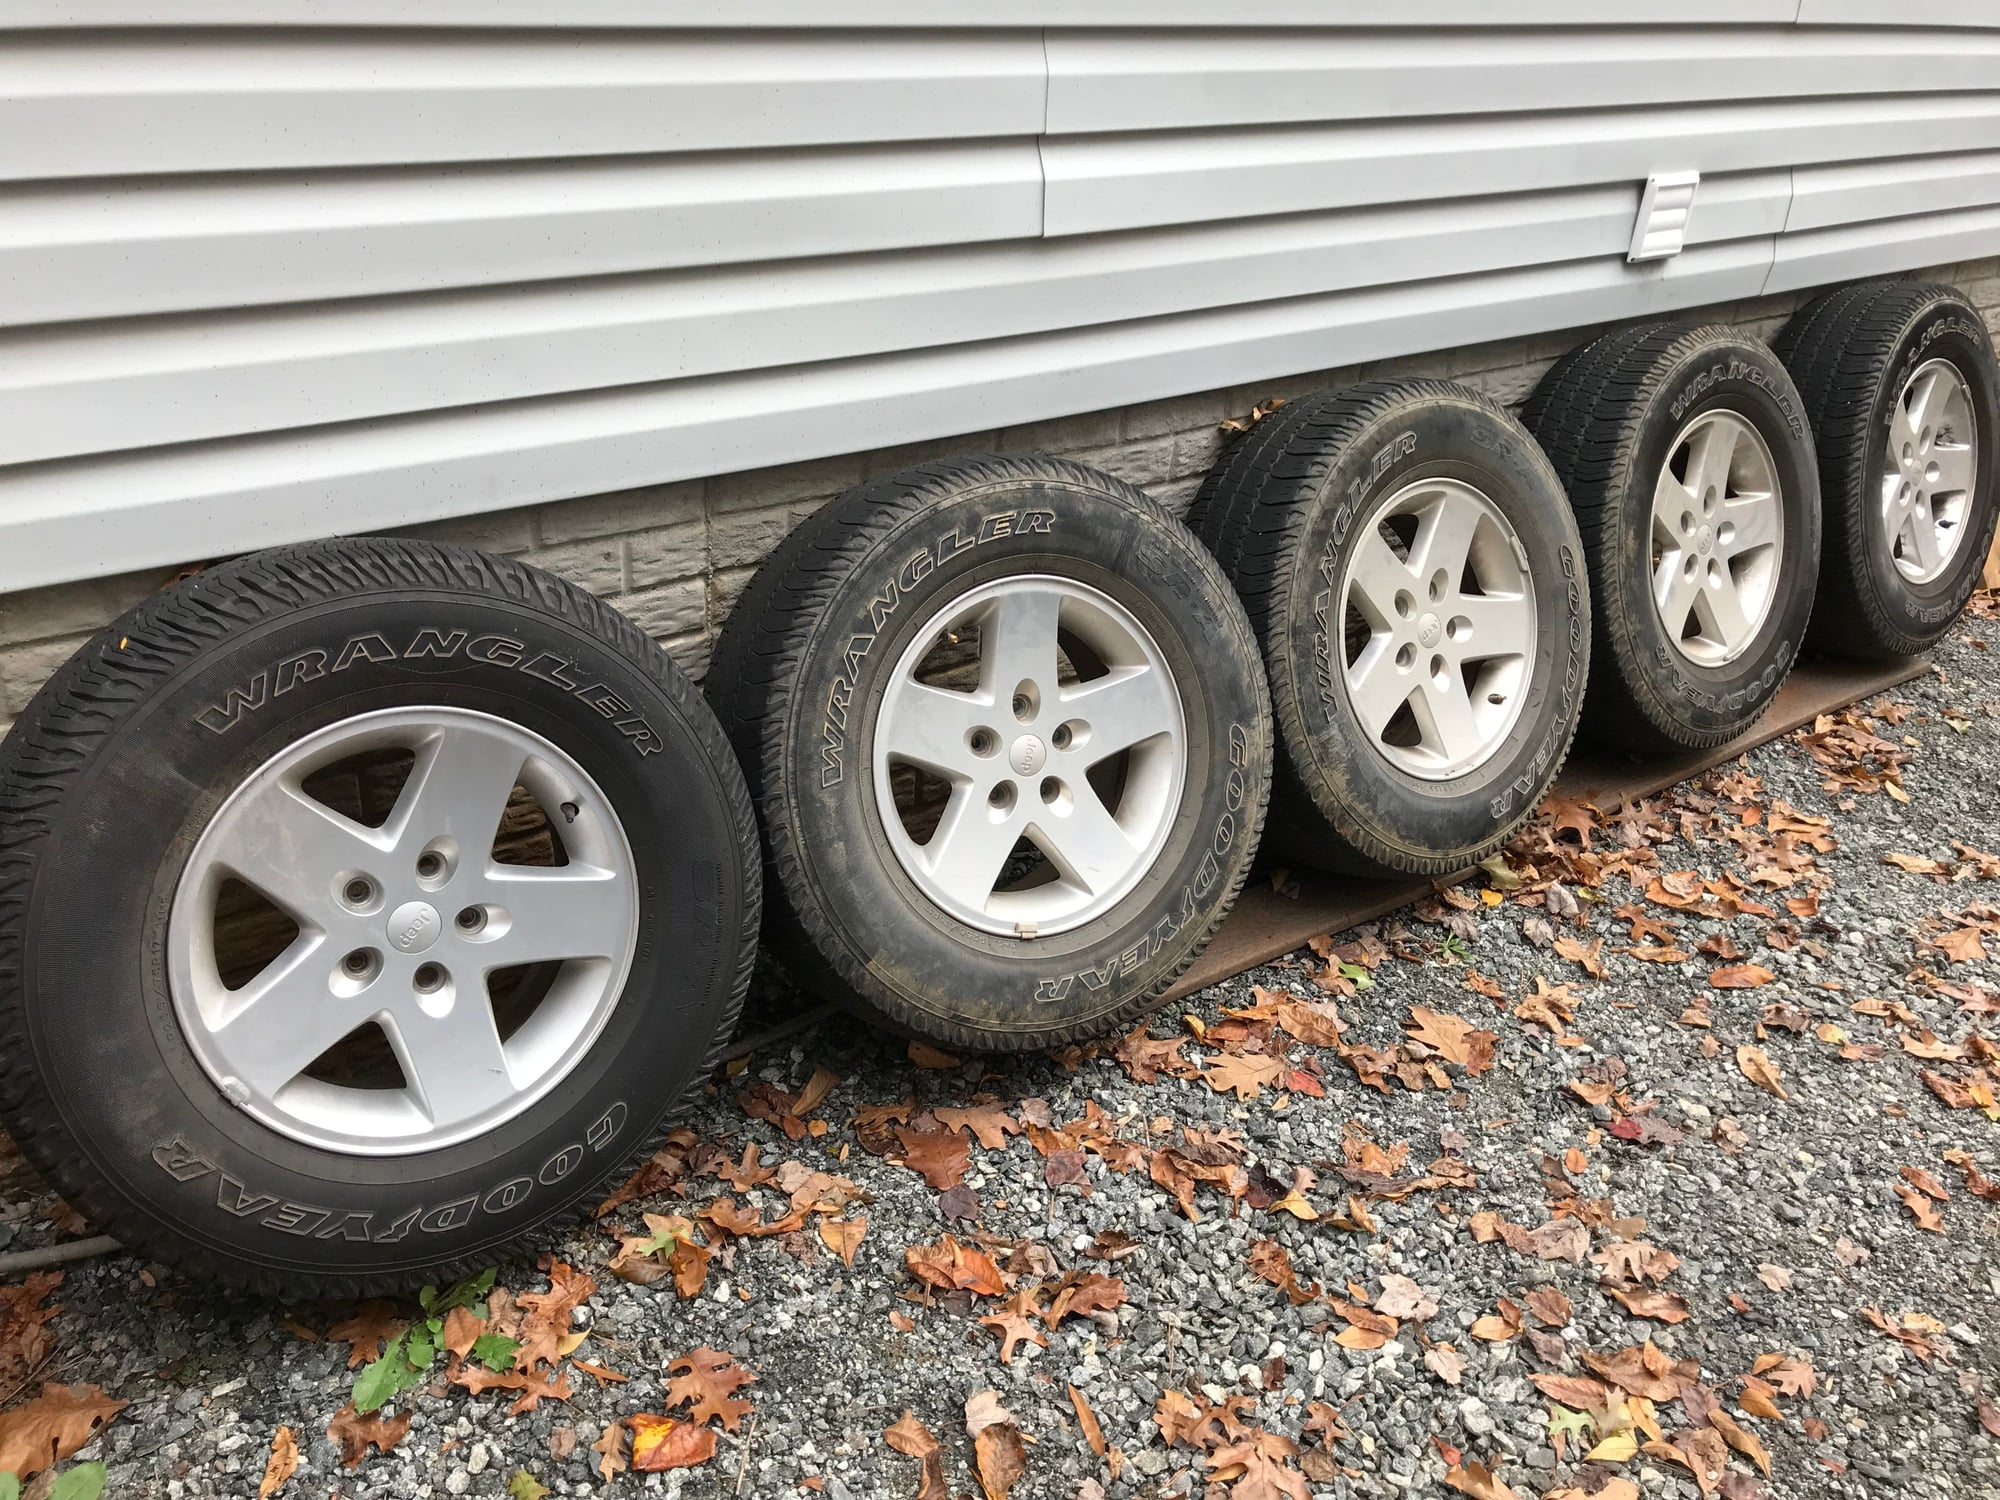 Wheels and Tires/Axles - Factory wheels + tires - Used - 2007 to 2017 Jeep Wrangler - Ruckersville, VA 22968, United States